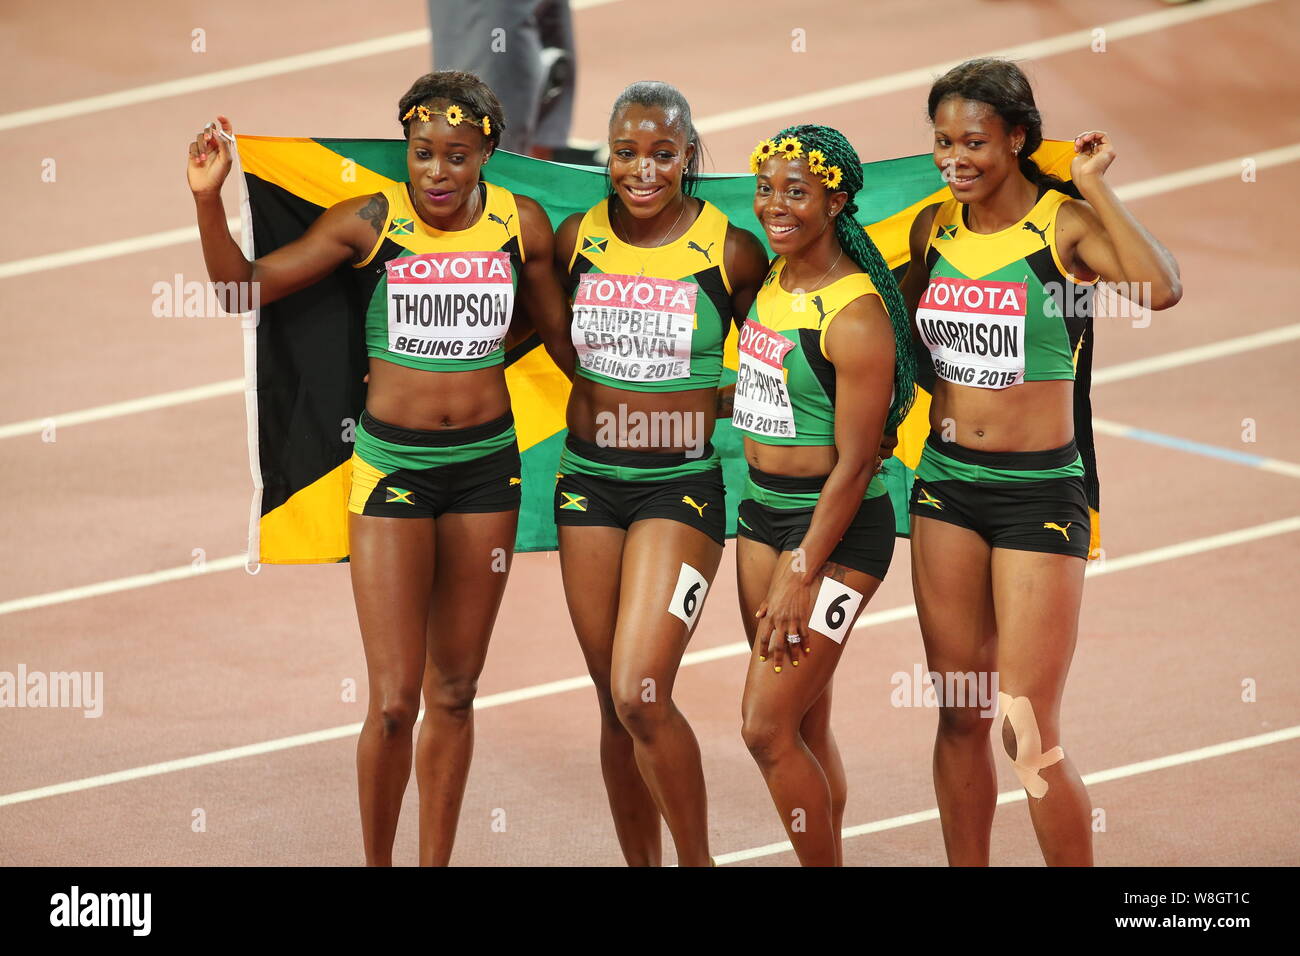 (From left) Elaine Thompson, Veronica Campbell-Brown, Shelly-Ann Fraser-Pryce and Natasha Thompson of Jamaica celebrate after winning the women's 4x10 Stock Photo